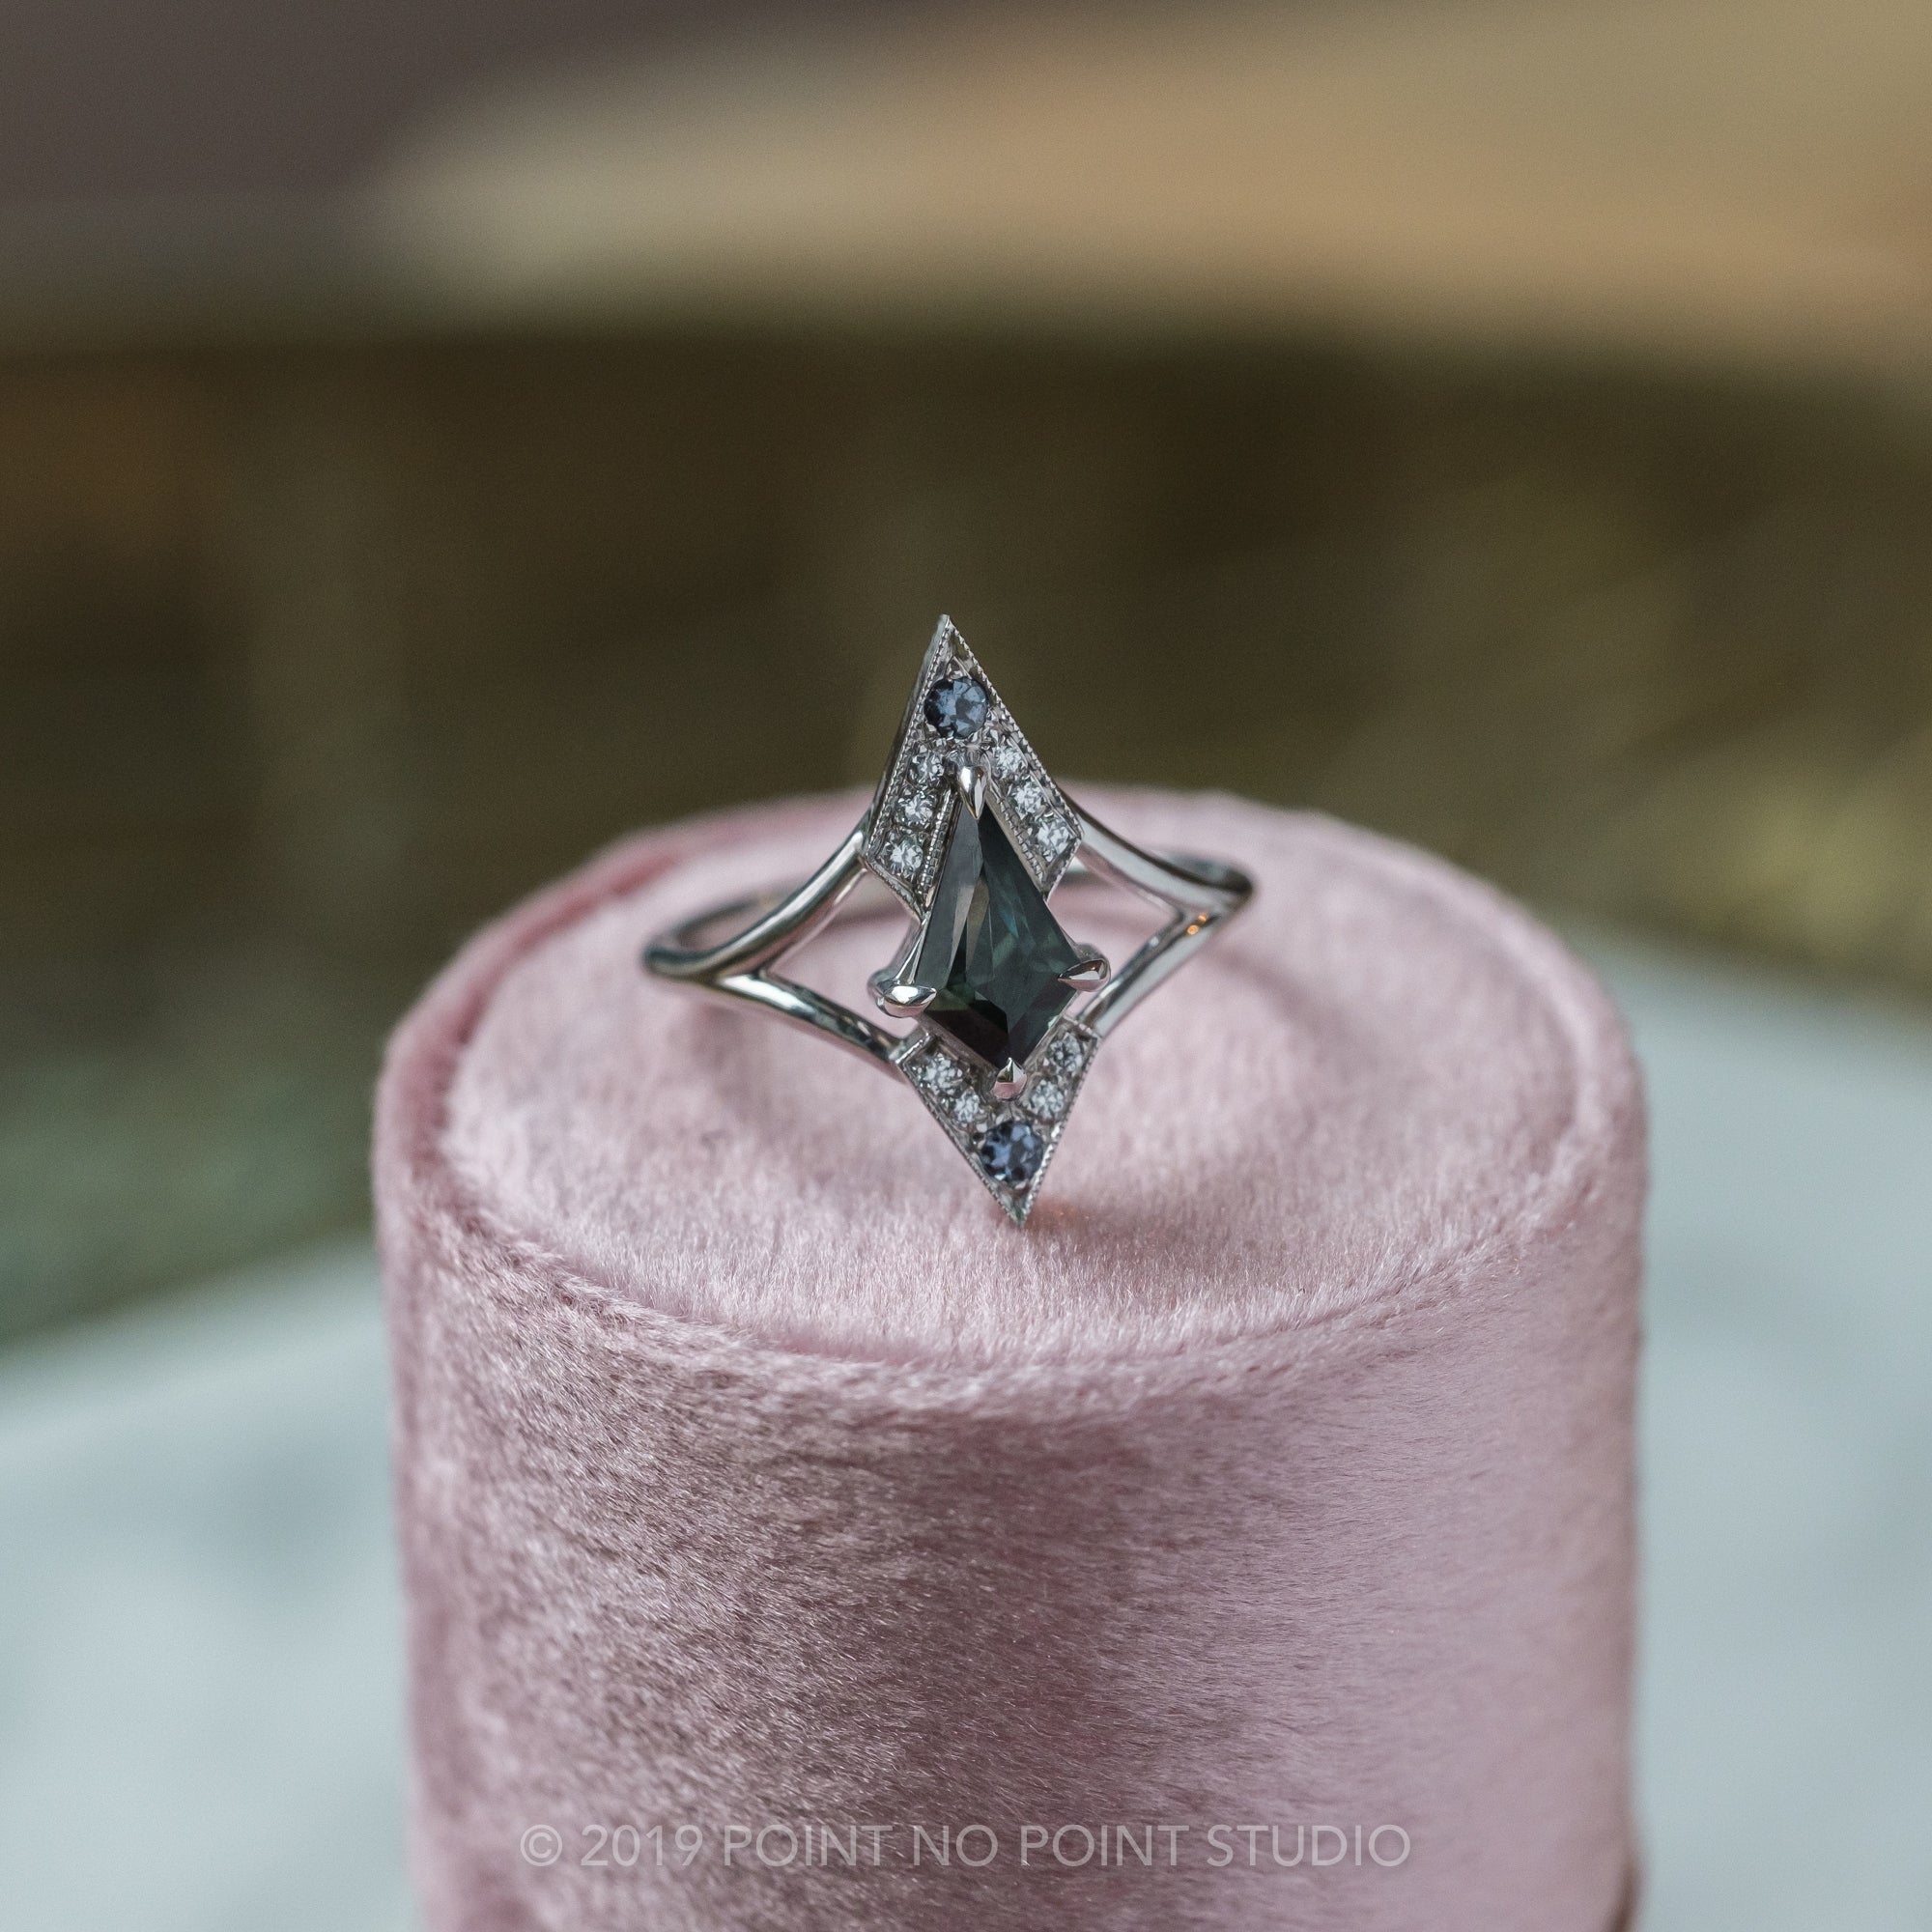 Can You Change or Add Prongs to a Ring? - Ken & Dana Design